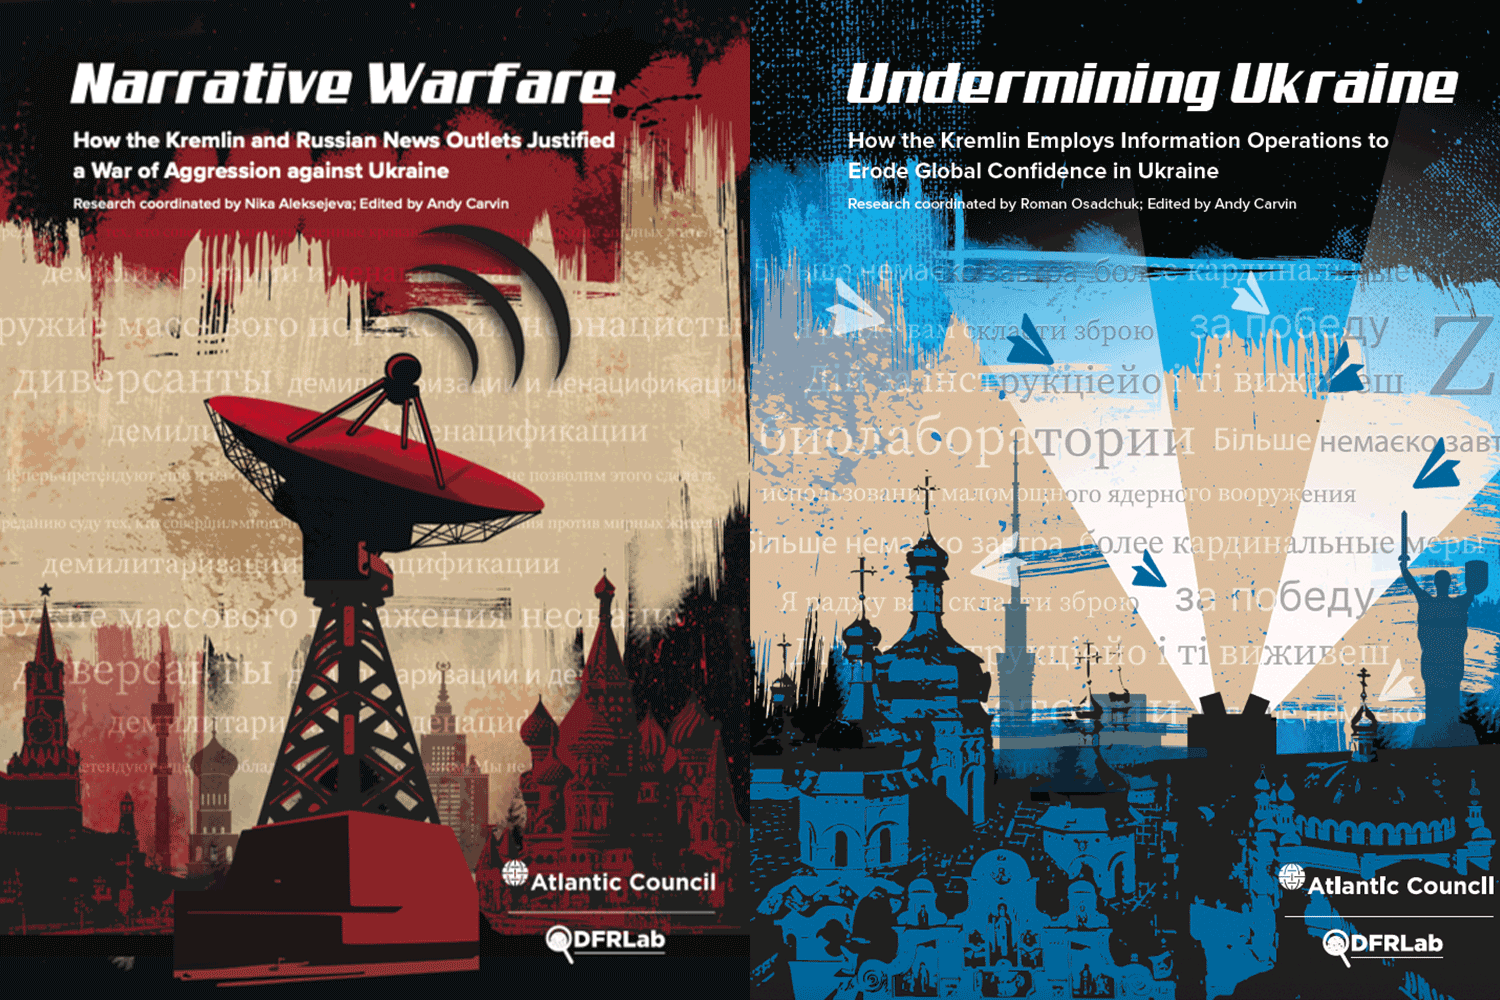 Russian War Report: DFRLab releases investigations on Russian info ops  before and after the invasion - Atlantic Council